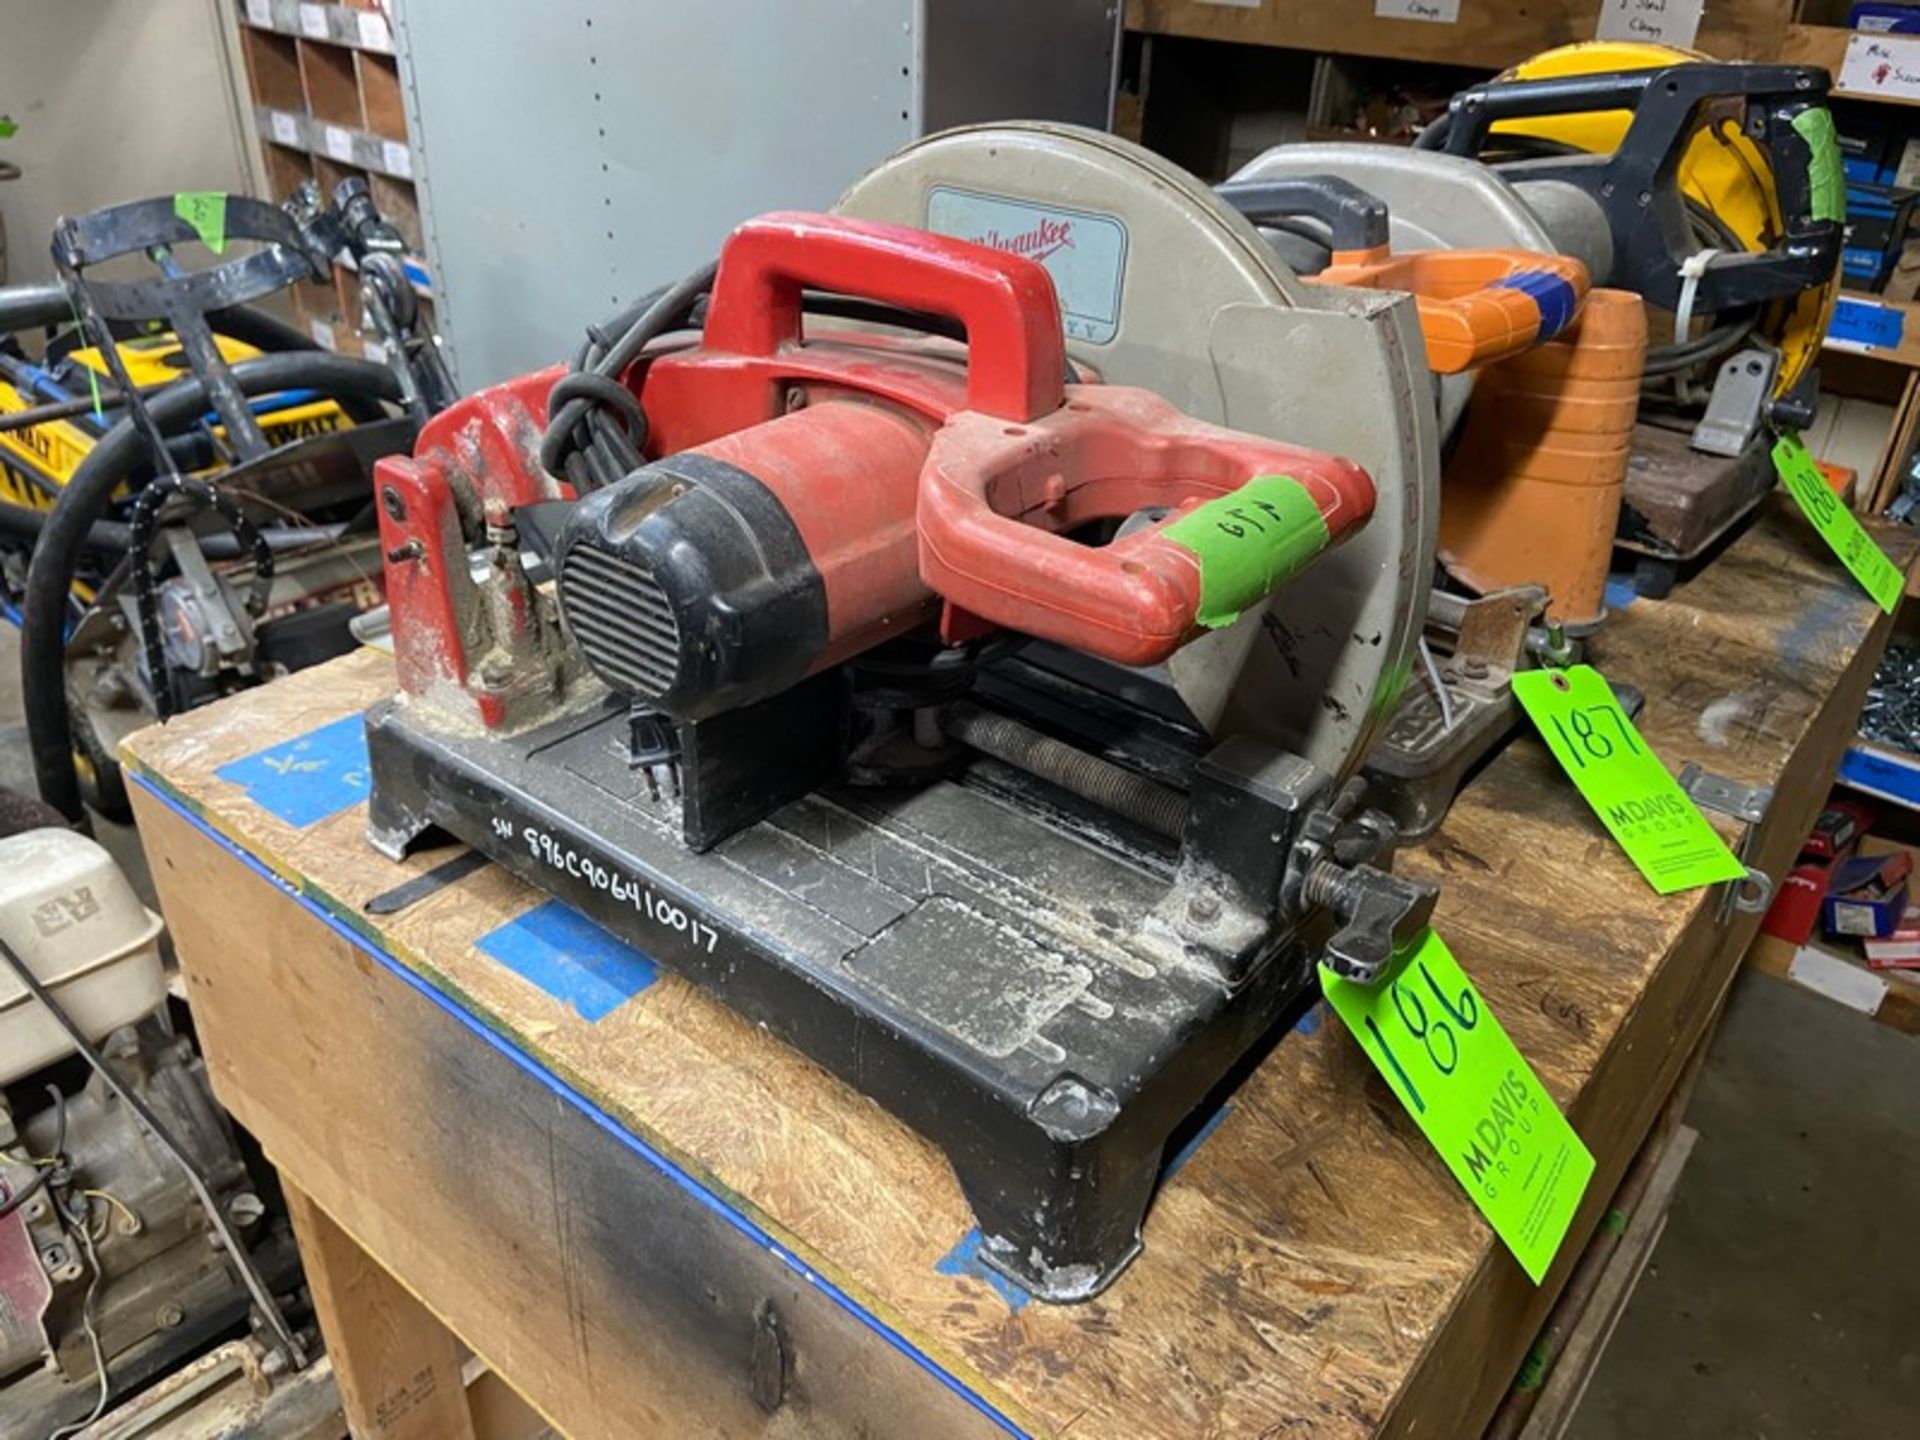 Milwaukee 14” Abrasive Chop Saw, S/N 896C906410017, 120 Volts (NOTE: No Blade) (LOCATED IN